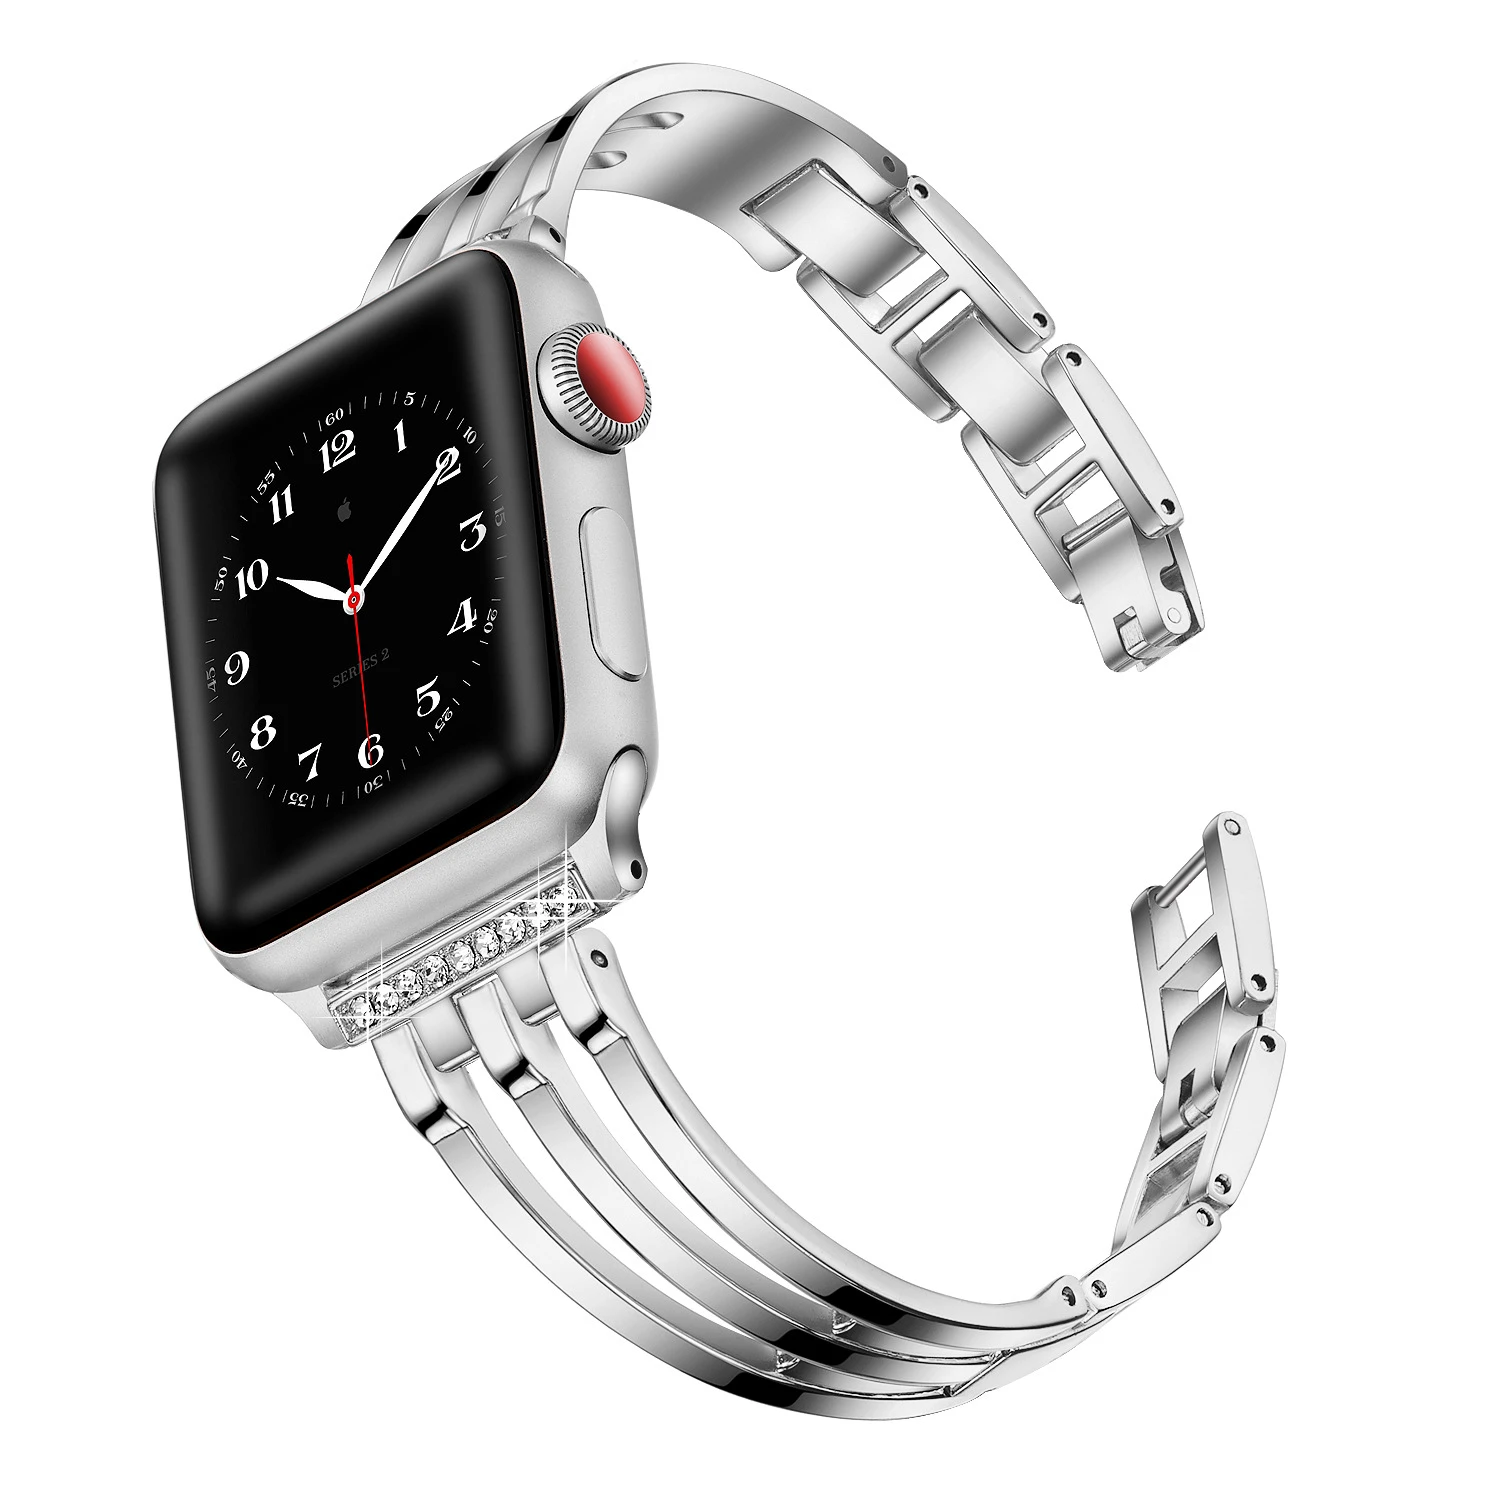 Jewelry Chain With Glitter Diamonds Stainless Steel Metal Wristband Strap for Apple watch Series 6 band 40mm for Women